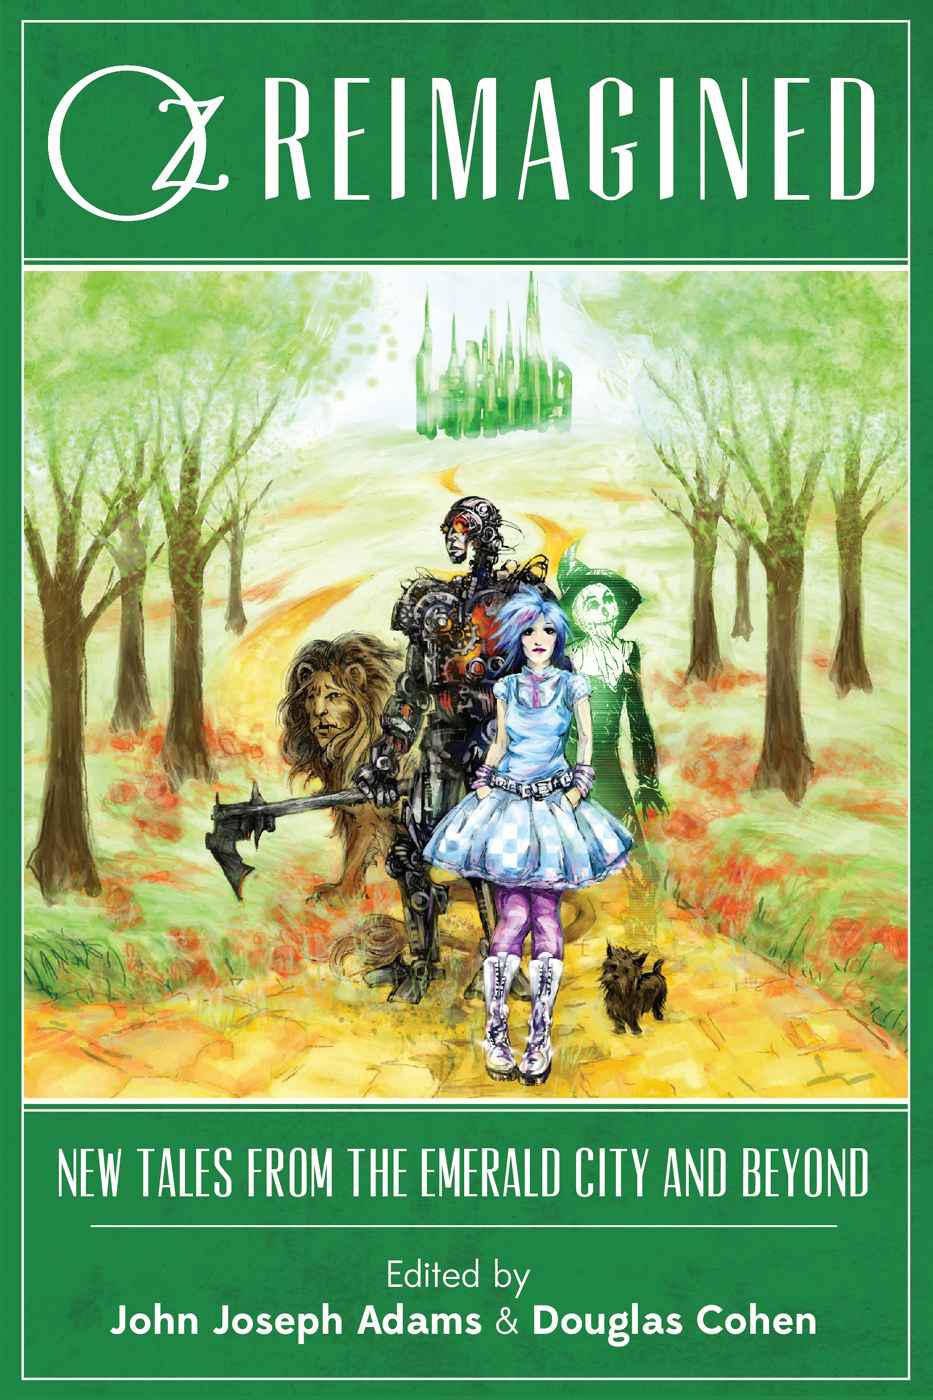 Oz Reimagined: New Tales from the Emerald City and Beyond by Unknown